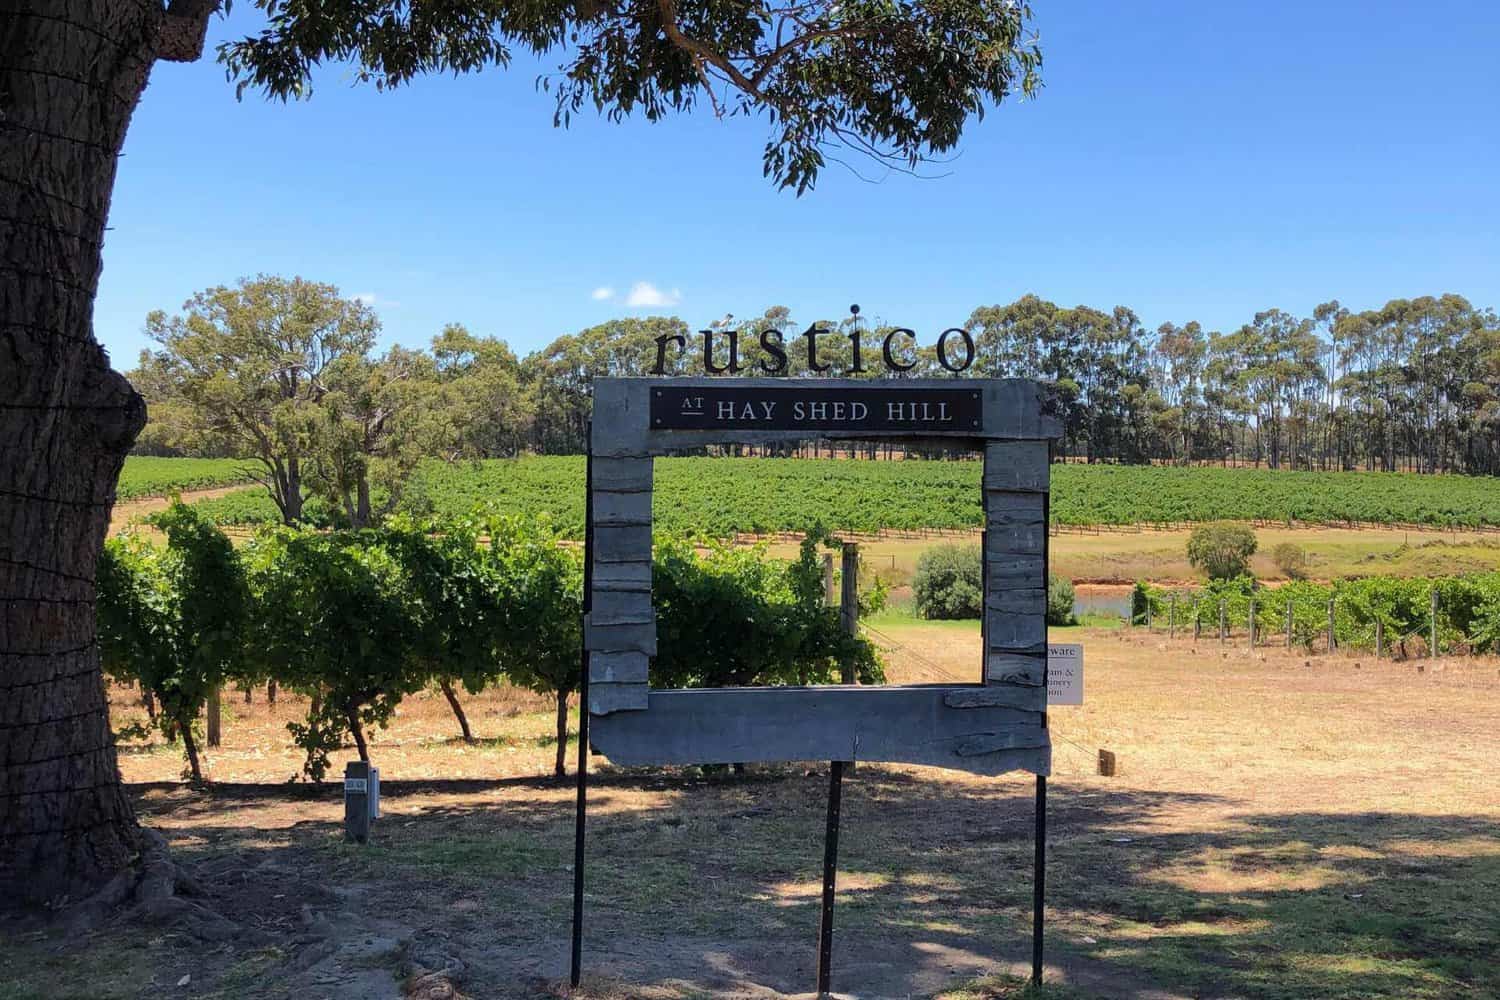 view of vineyard at Rustico/Hay Shed Hill, on a wine tours Busselton
